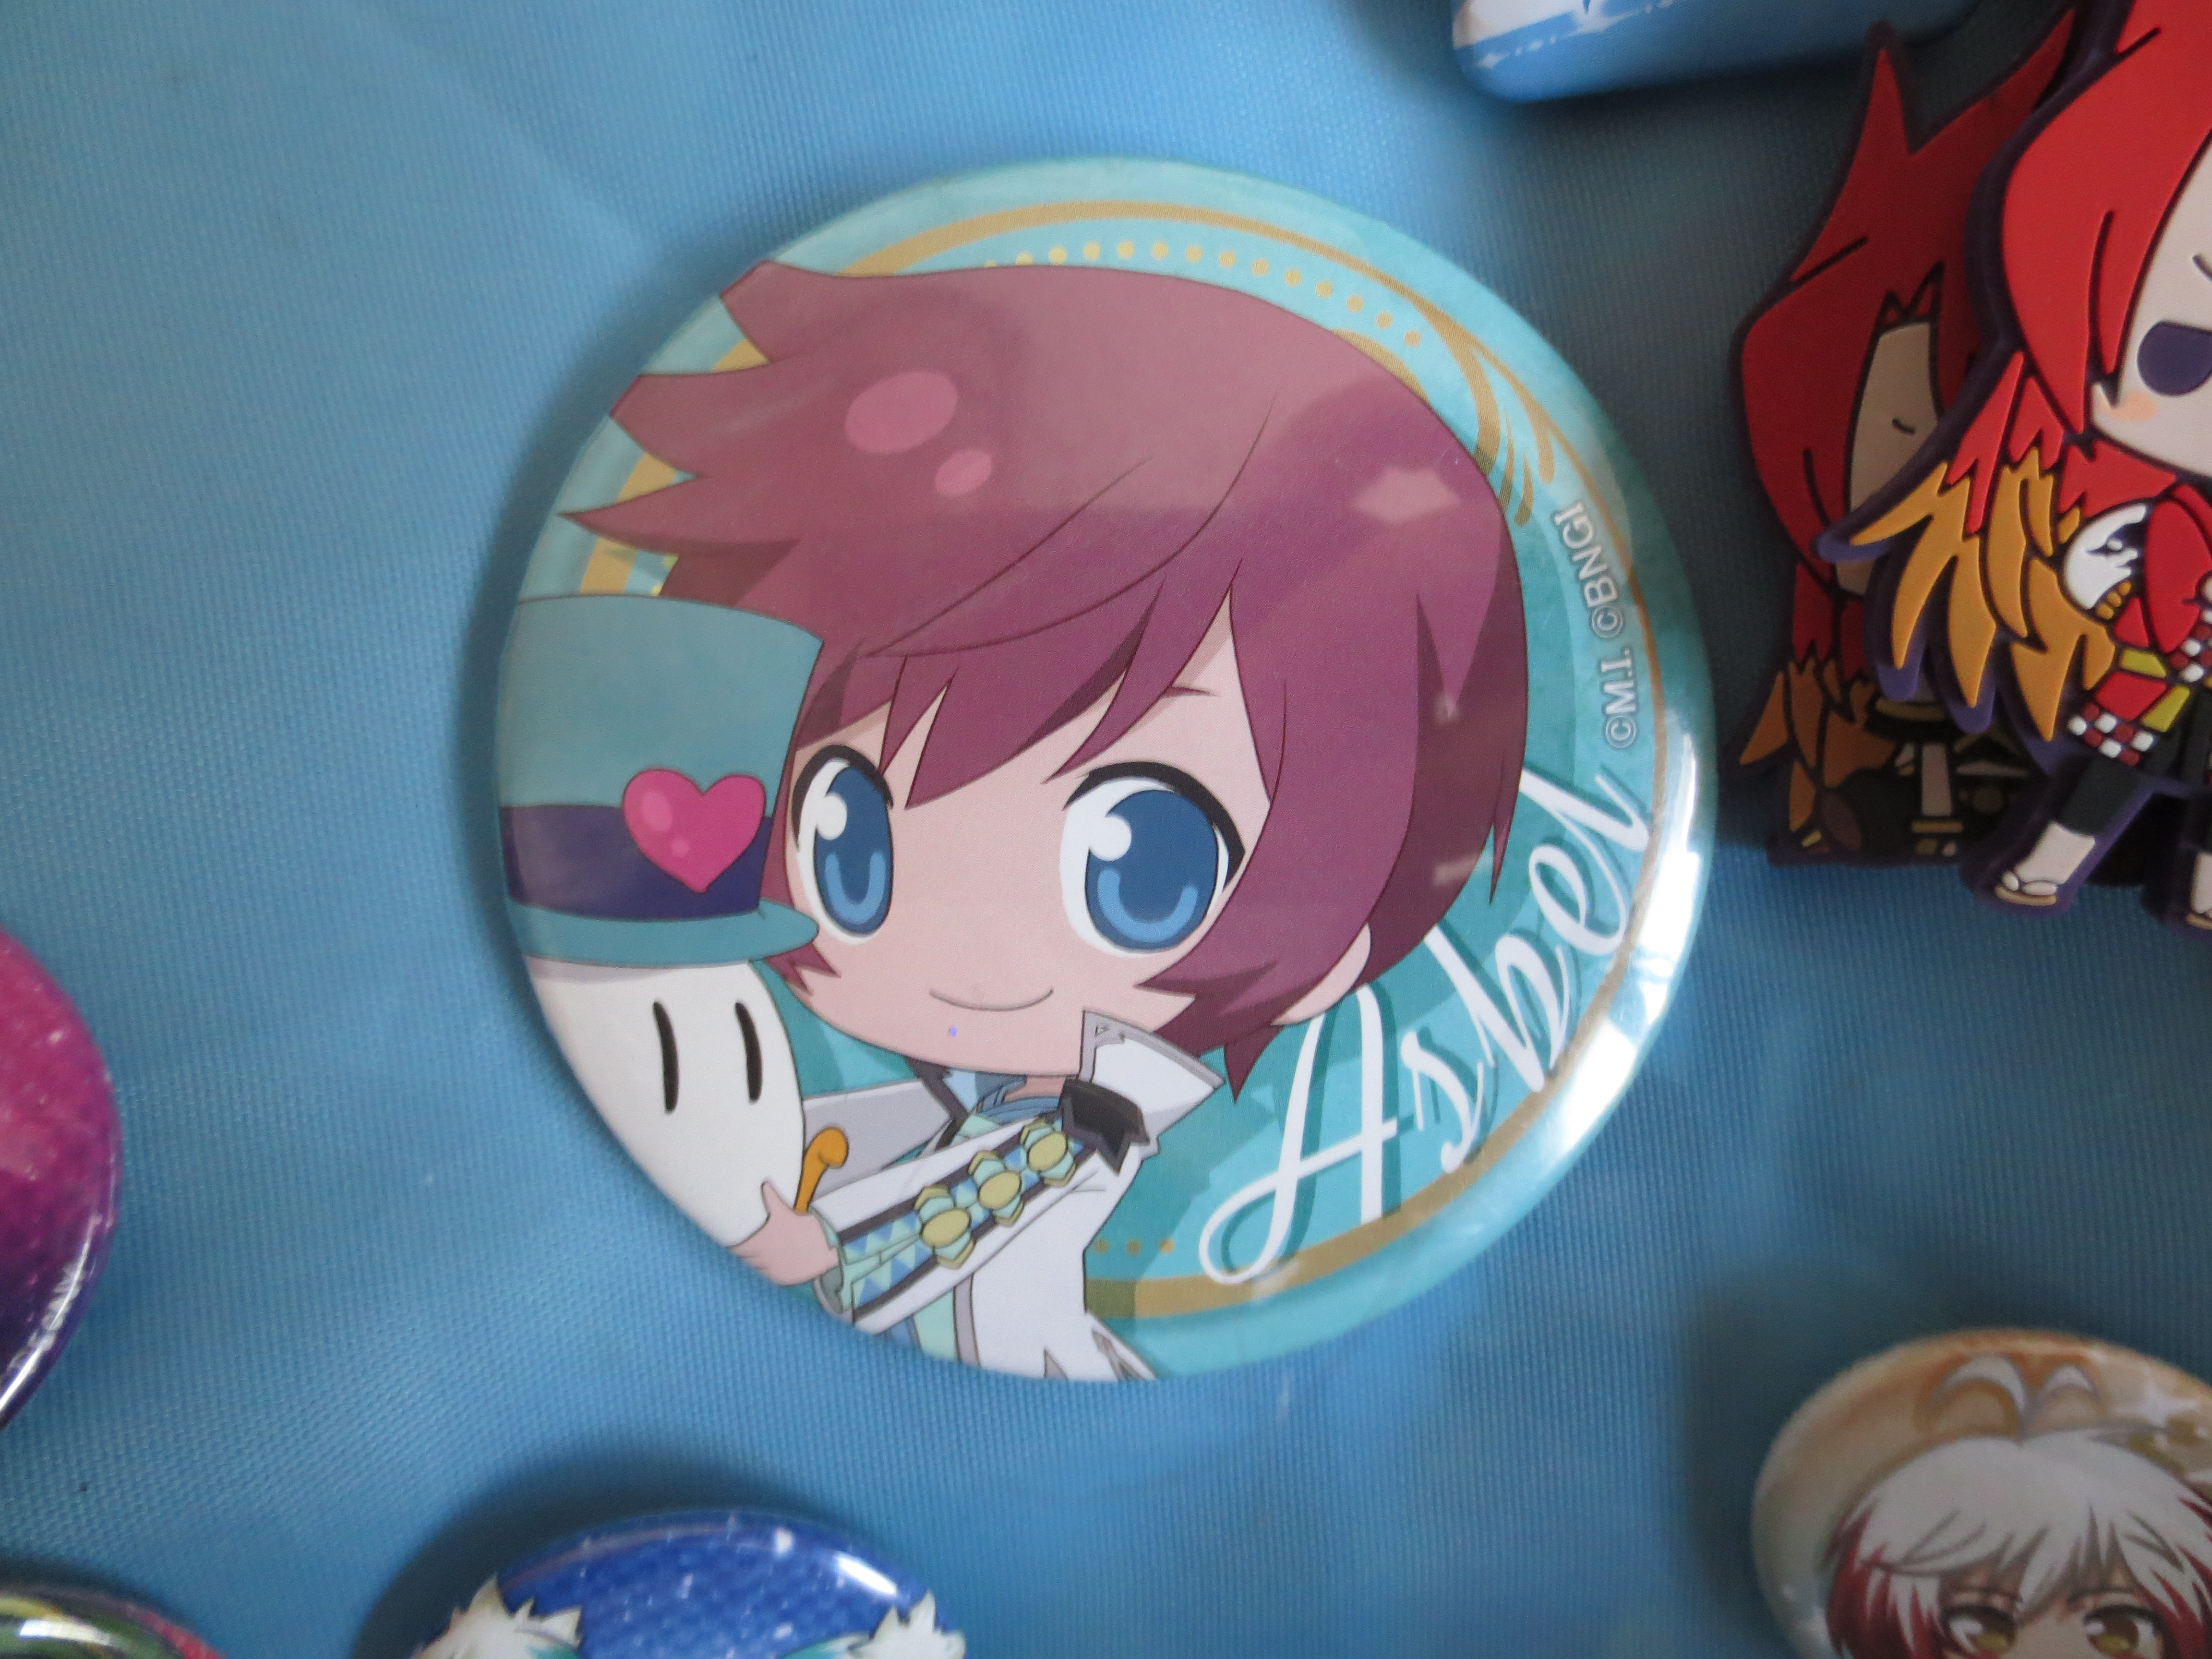 Asbel Badge from the Tales of Zestiria release event at Namja Town